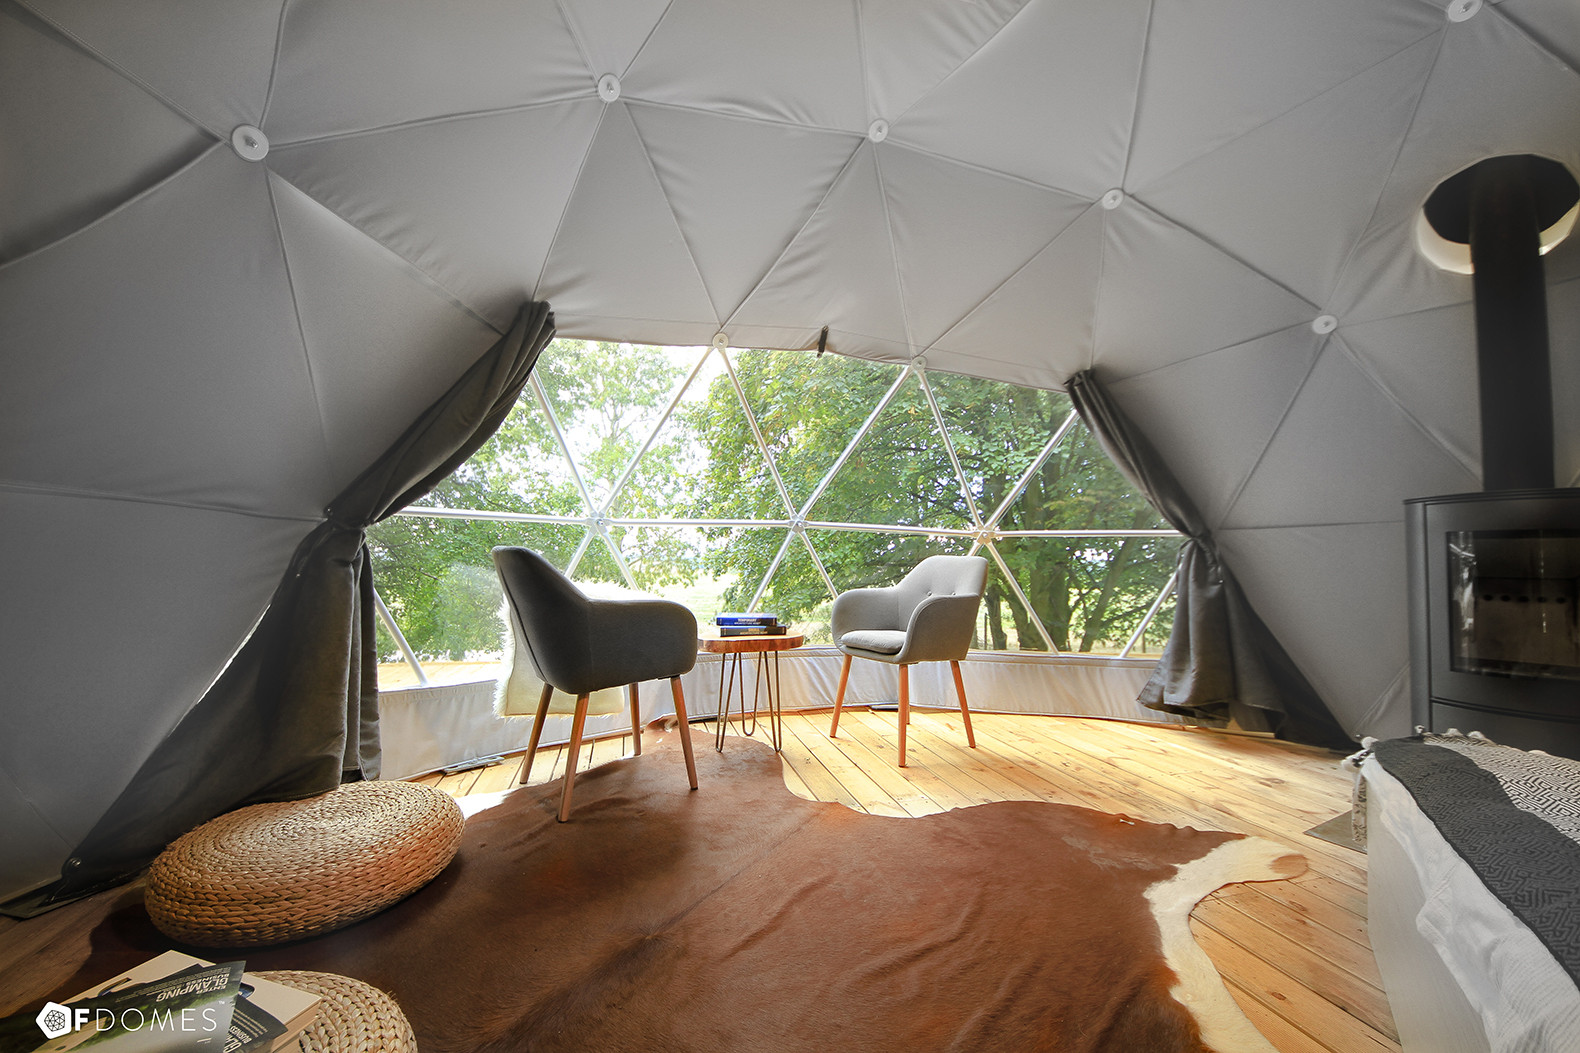 Design Your Own Backyard
 Create Your Own Backyard Geodesic Dome With F Dome 039 s